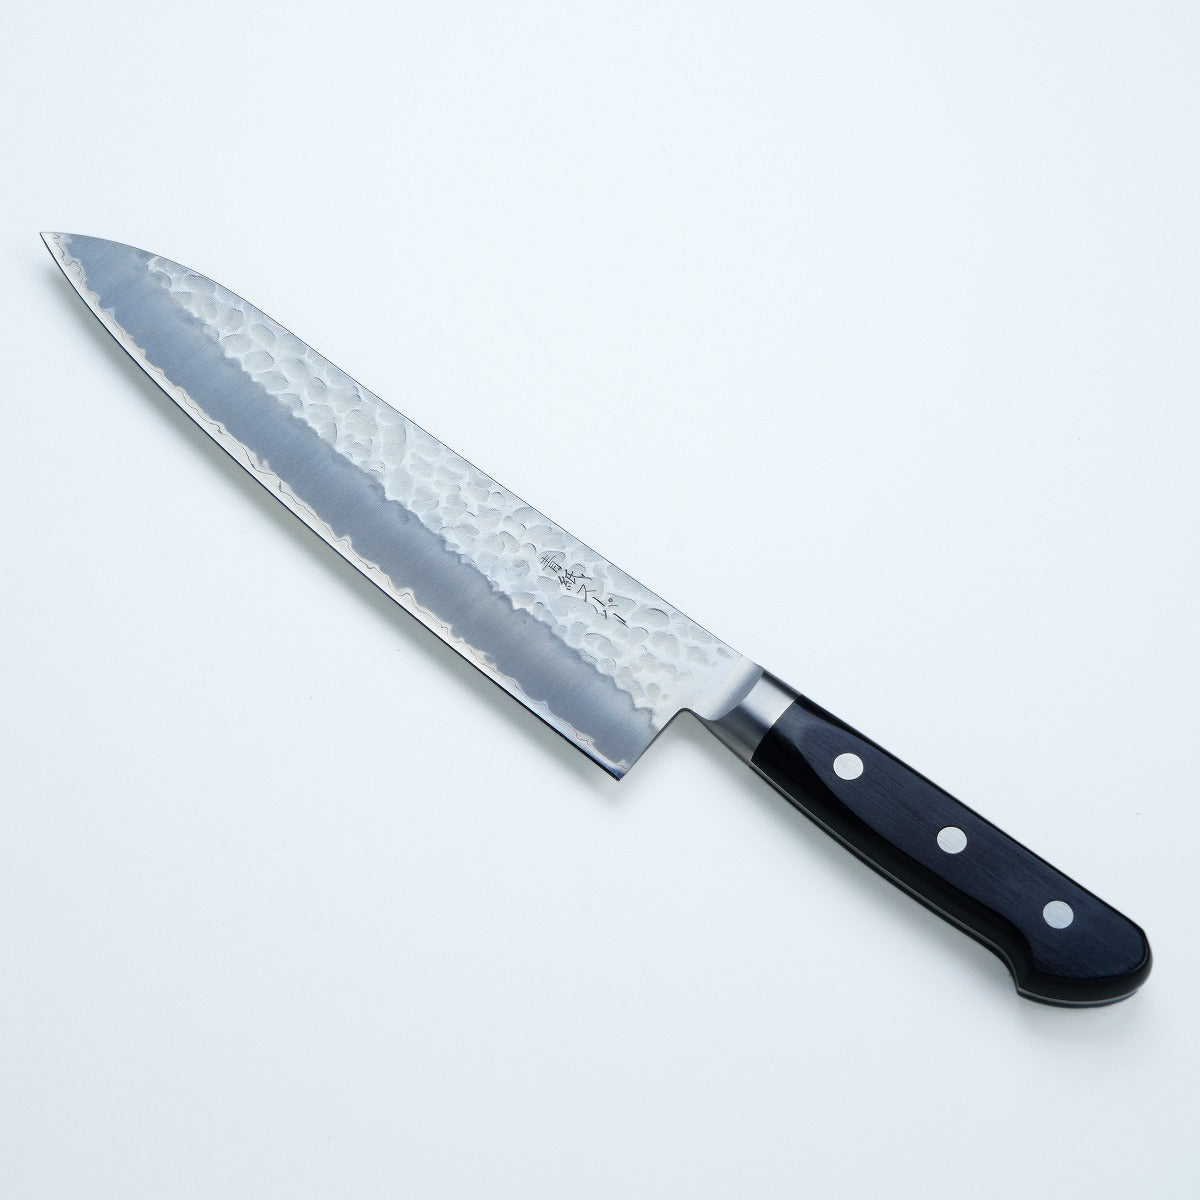 "AO-UMA" Gyuto (Chef's Knife) Aogami Super Steel, Hammered Pattern, 210mm